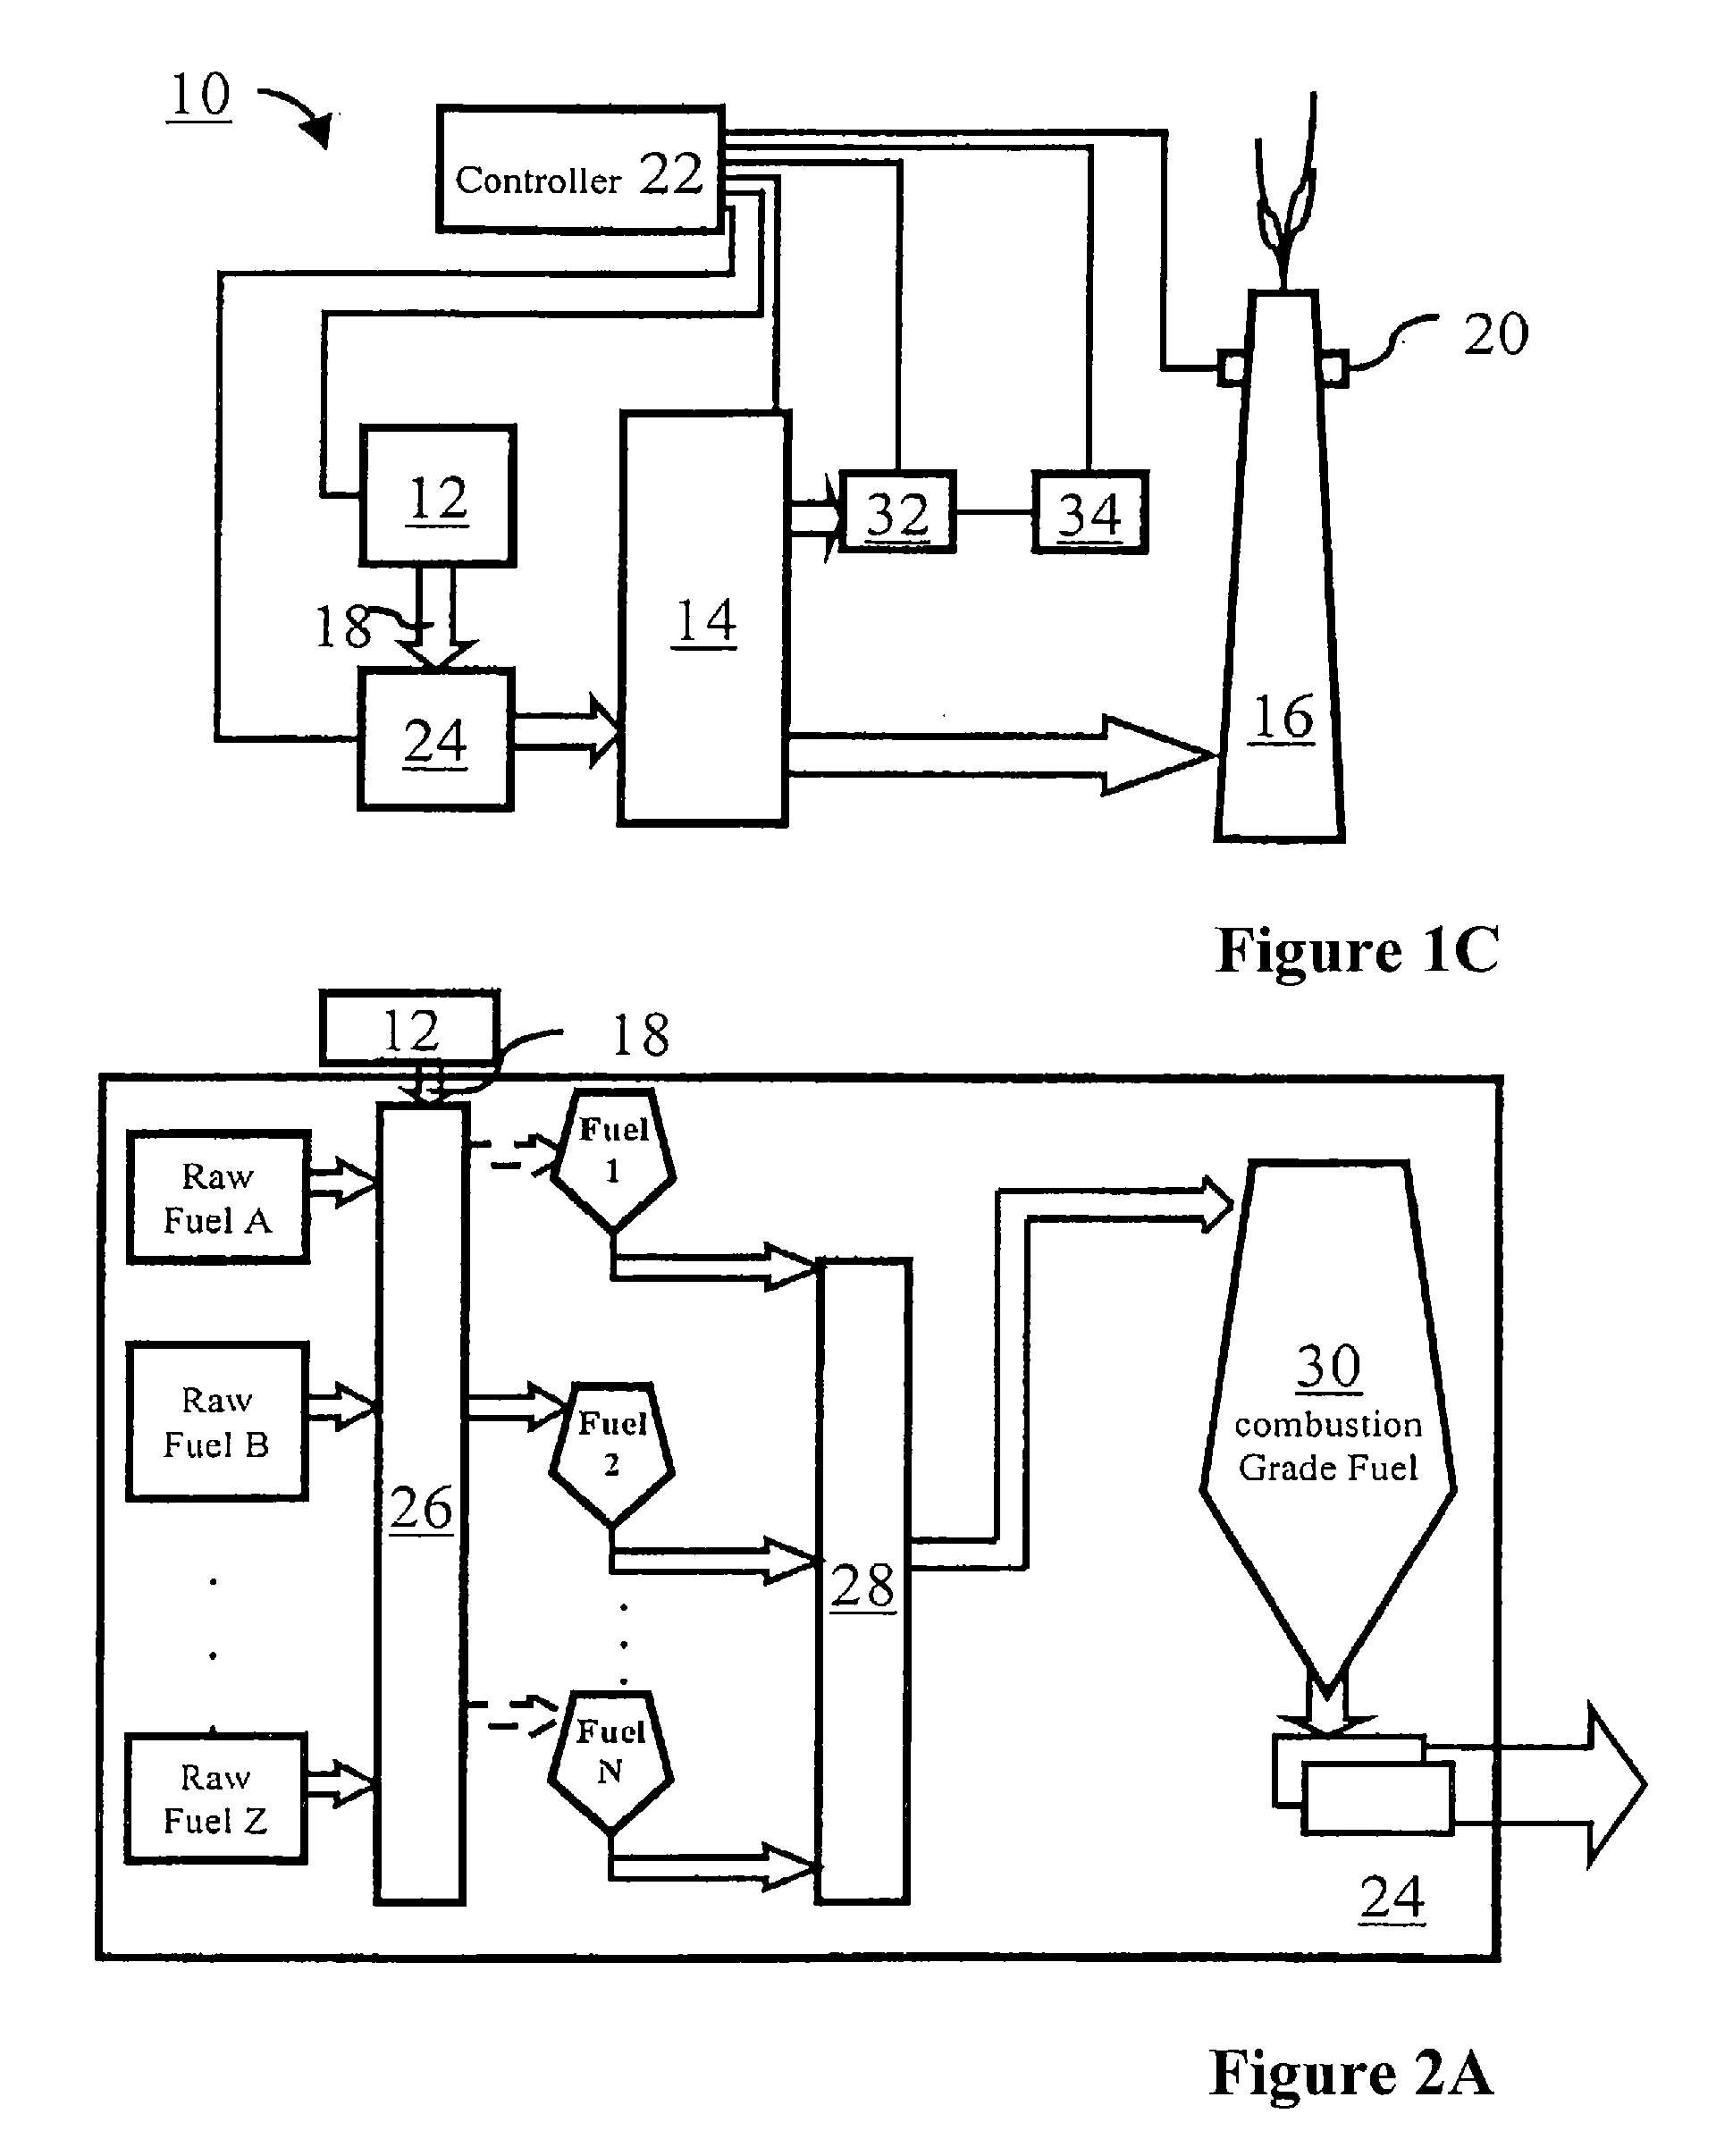 Preparation of fuel usable in a fossil-fuel-fired system